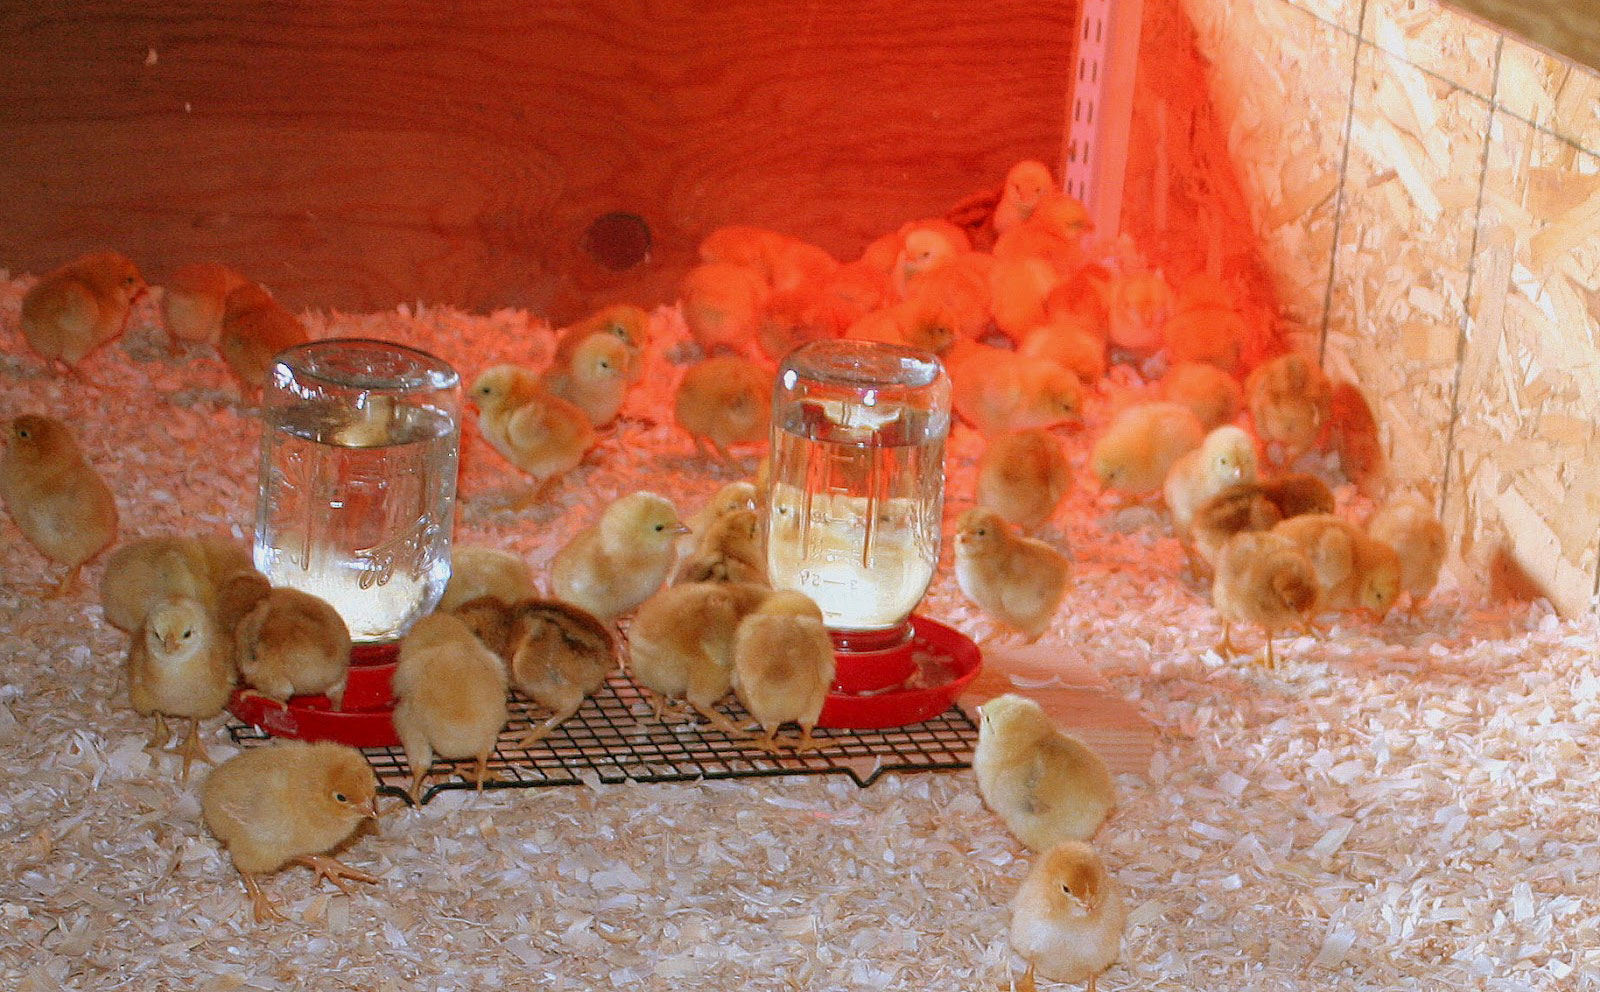 Chicks in a brooder.